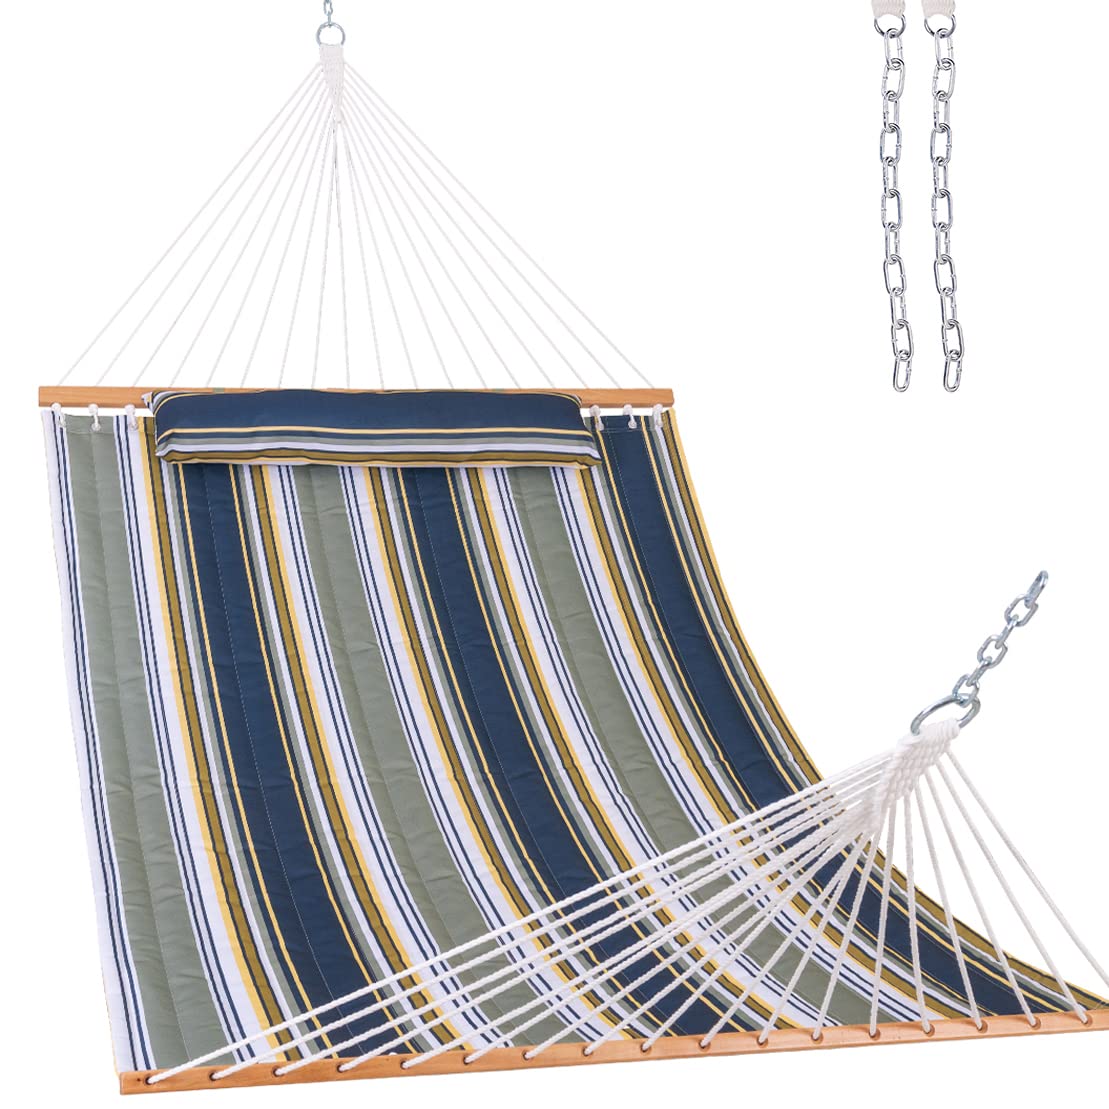 Lazy Daze Hammocks 12 FT Quilted Fabric Hammock with Spreader Bar, 2-Person Double Hammock with Chains and Pillow, Outdoor Hammo